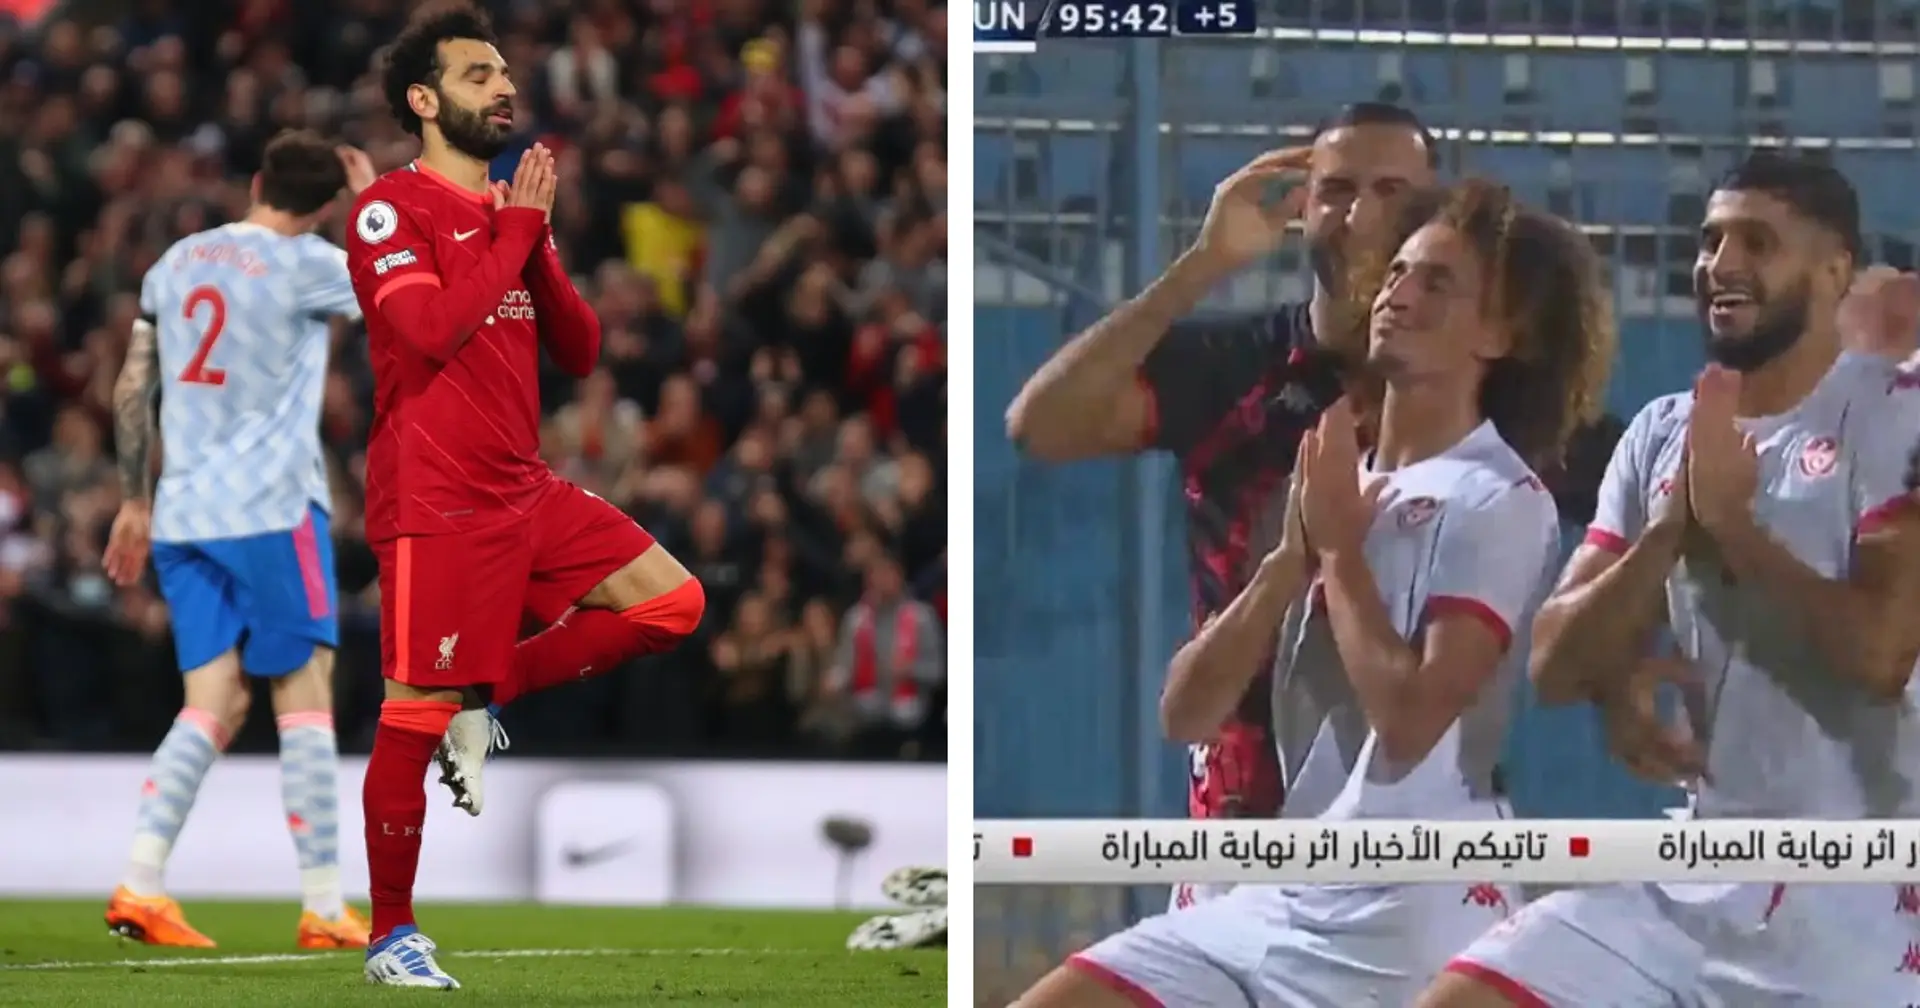 Man United youngster Hannibal taunts Salah with celebration in win over Egypt